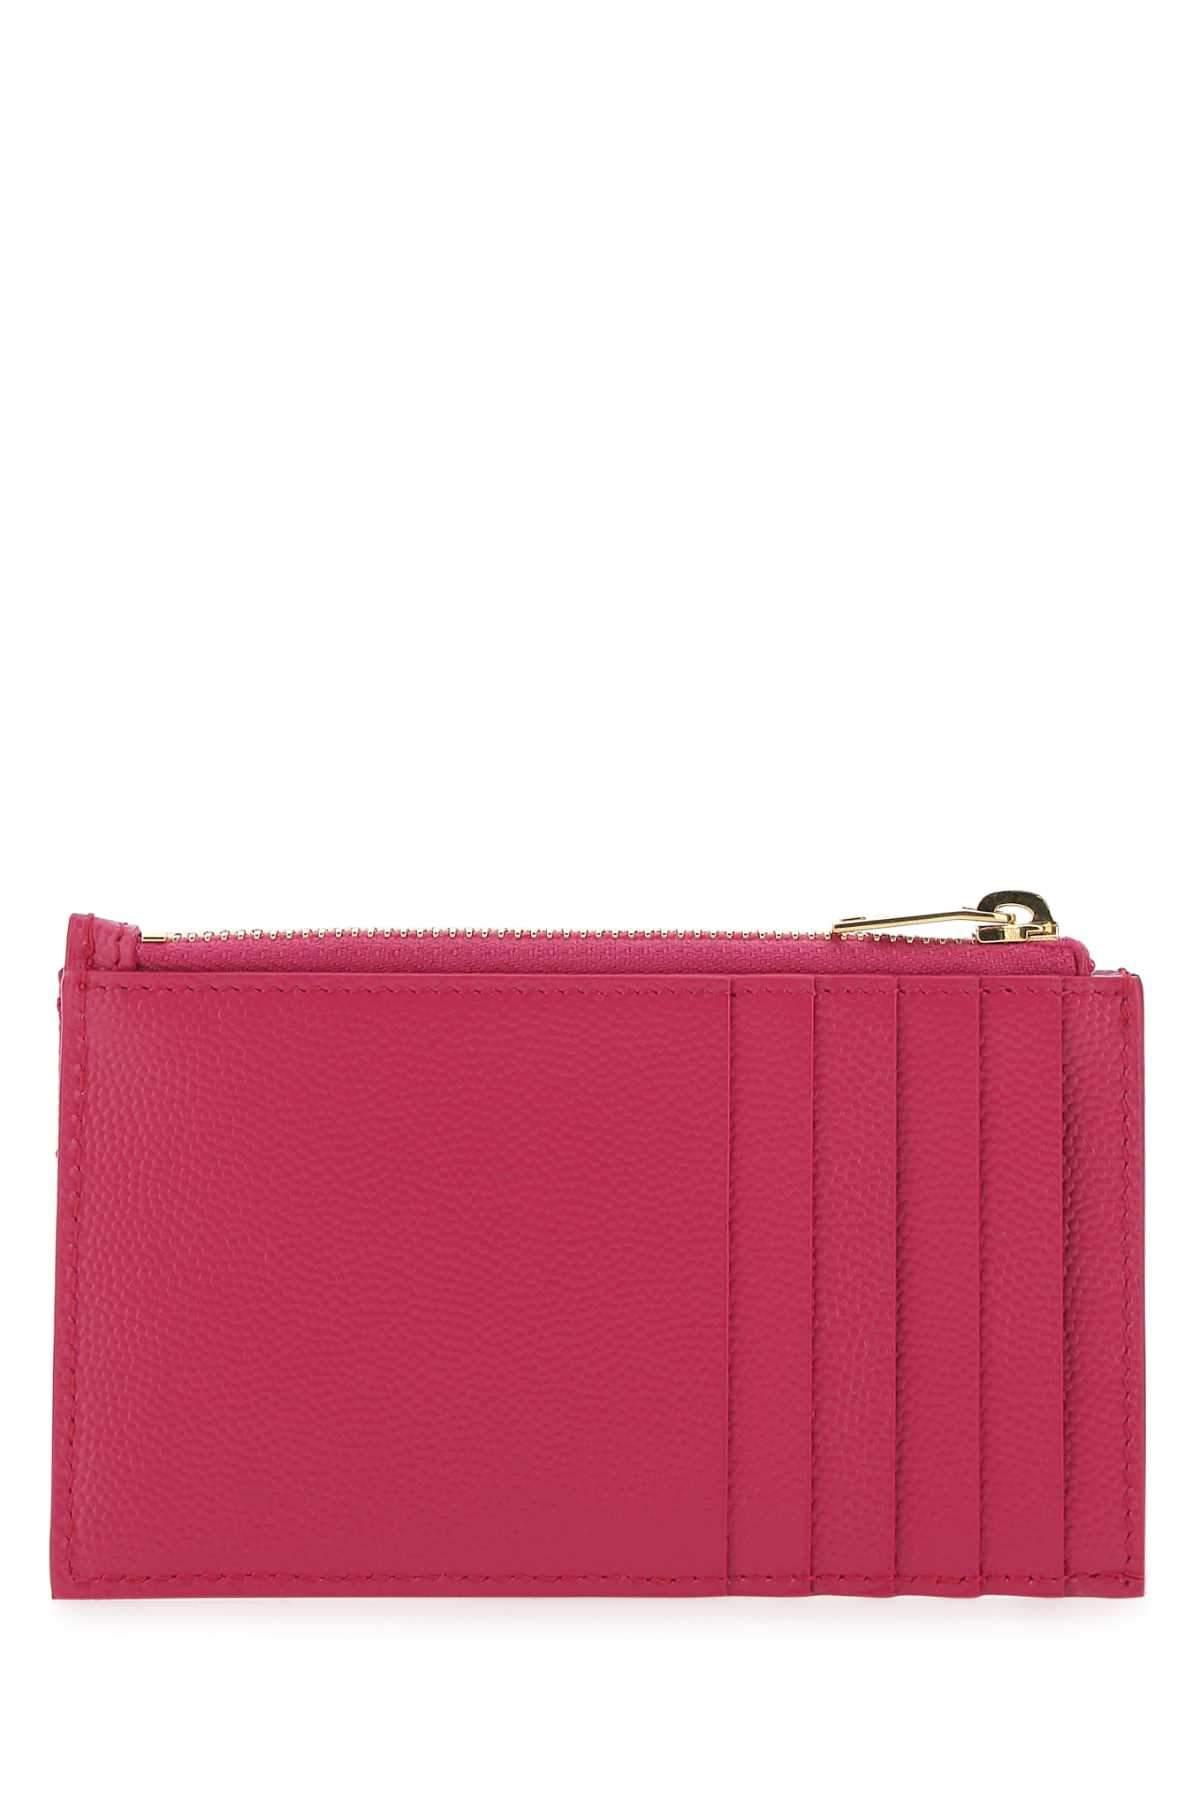 Only 130.00 usd for Authentic Saint Laurent Pink Zip Card Holder